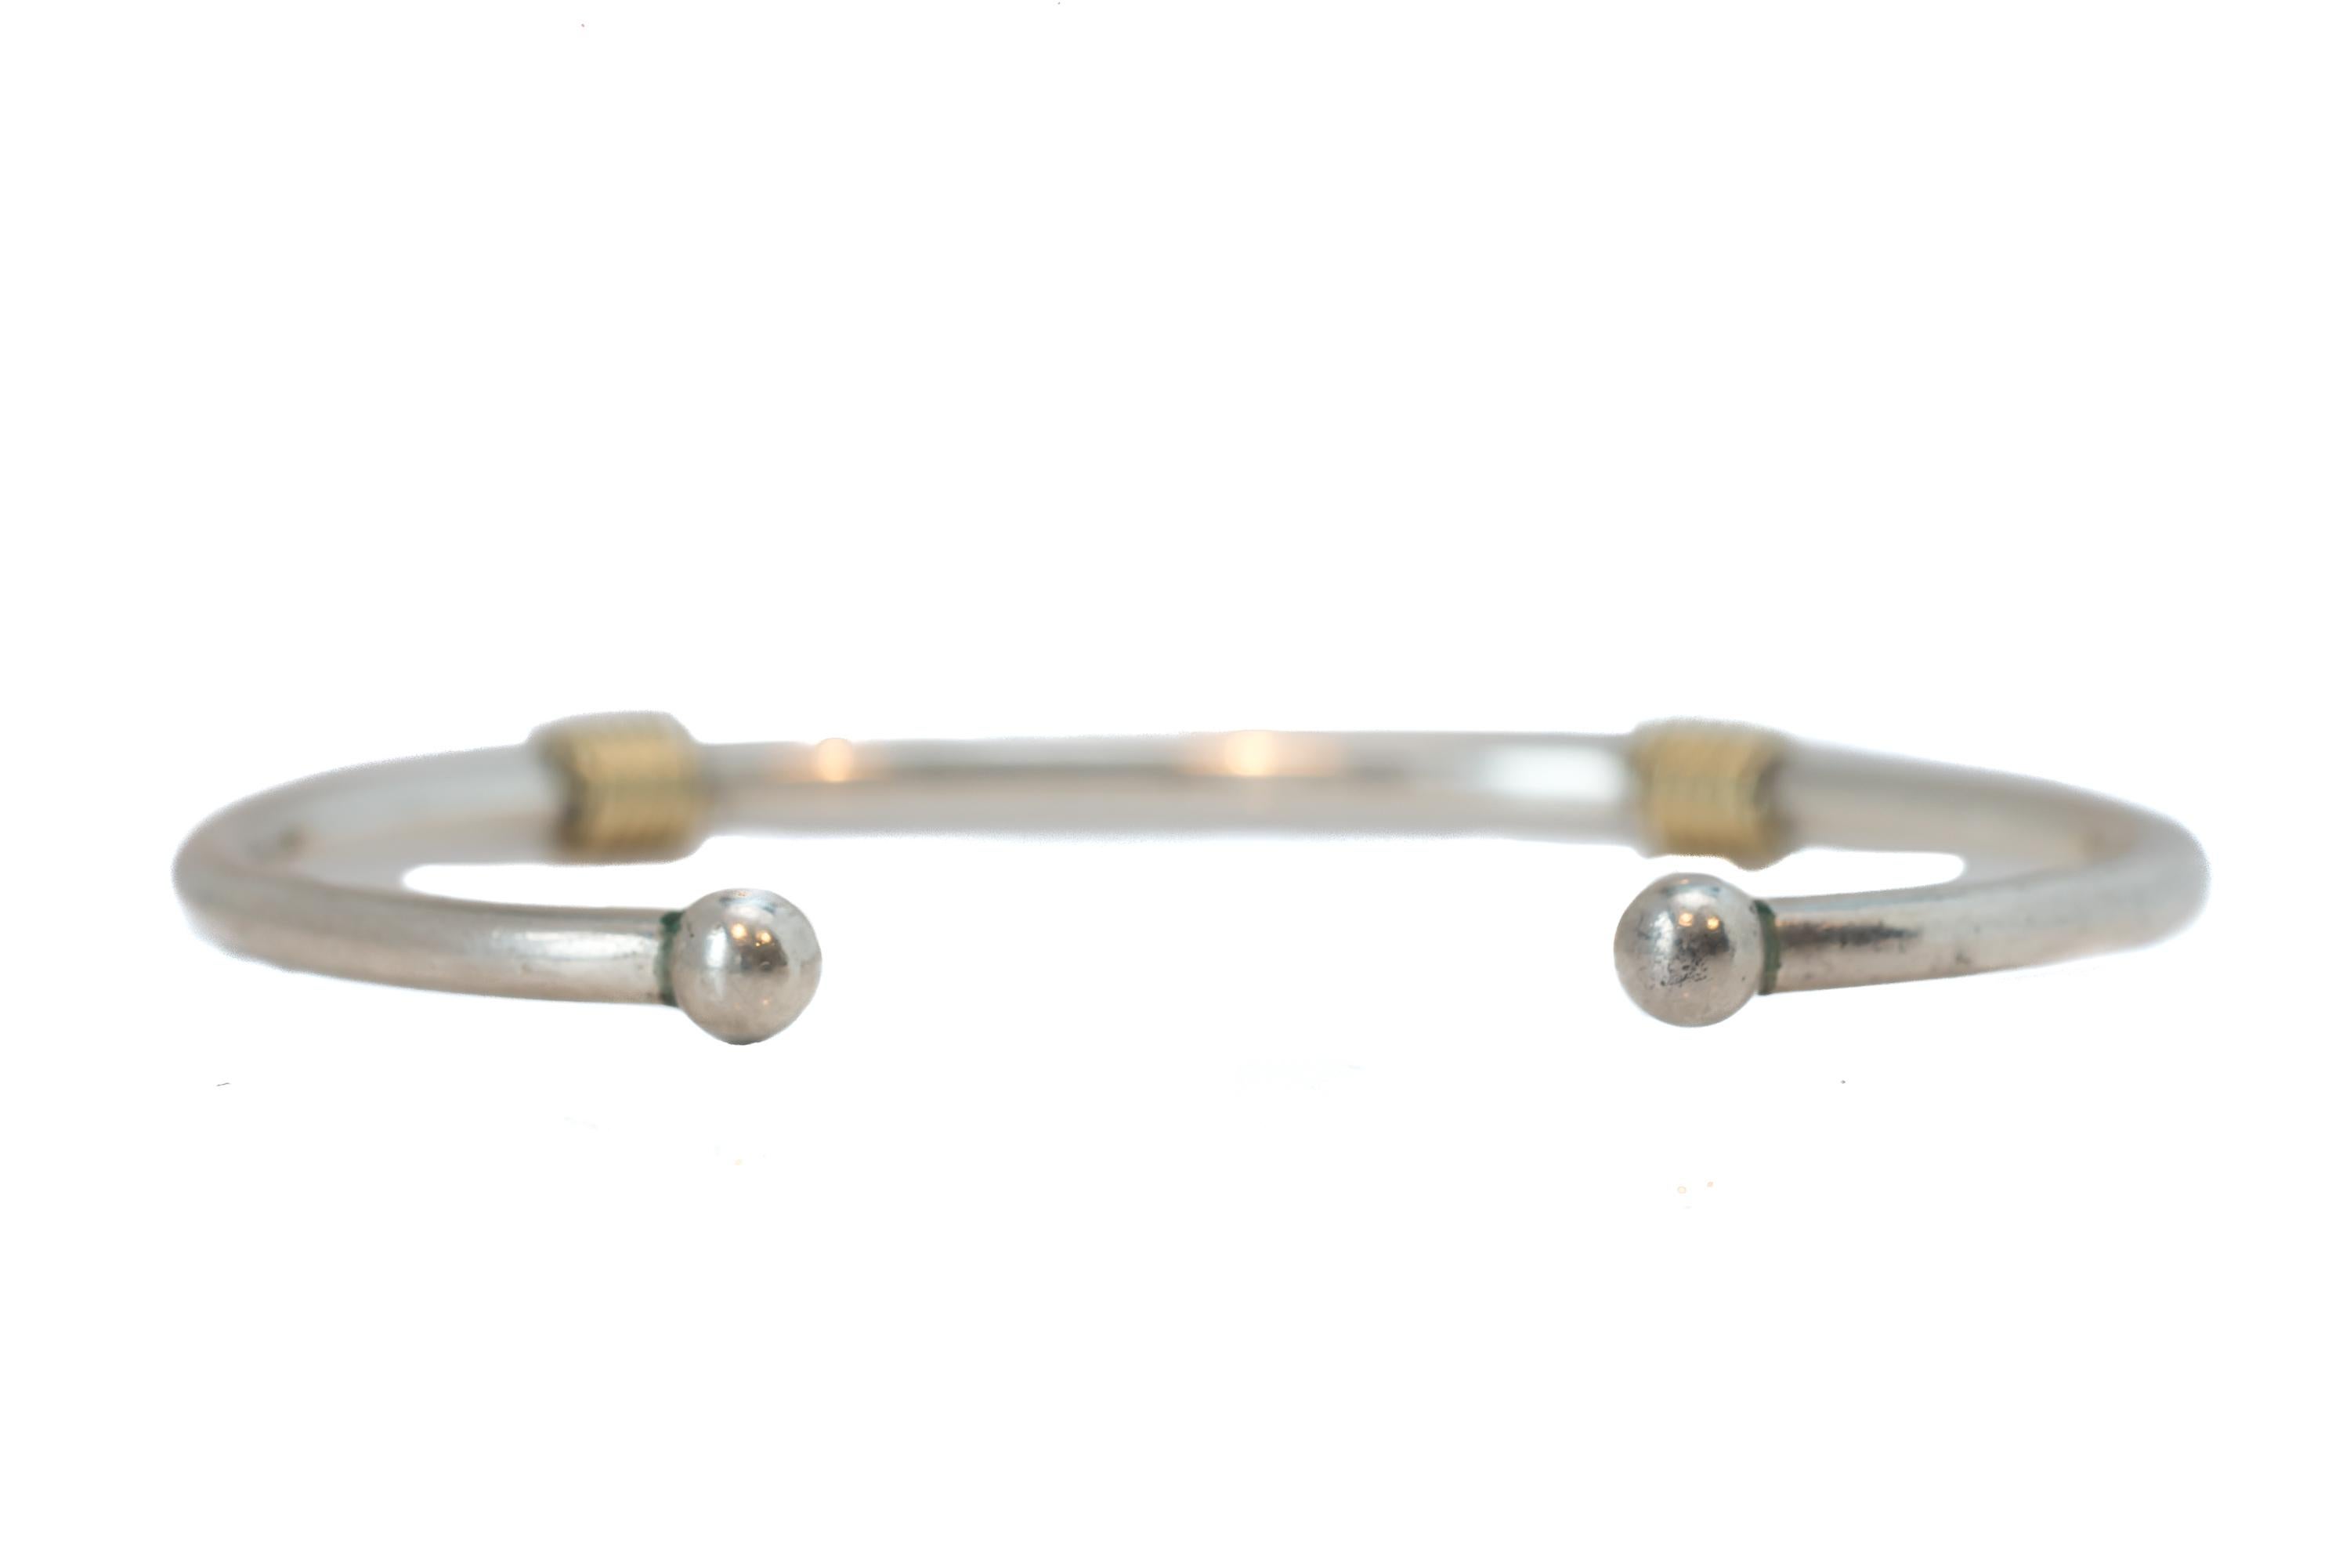 Tiffany and Co. Sleek Design Bangle Bracelet
Torc Style design featuring a High Polish Sterling Silver and 18 Karat Yellow Gold Wire Wrap Accents

Bracelet is signed along the inner surface

Bracelet Details:
Size: 6 inches from end to end, 1 inch